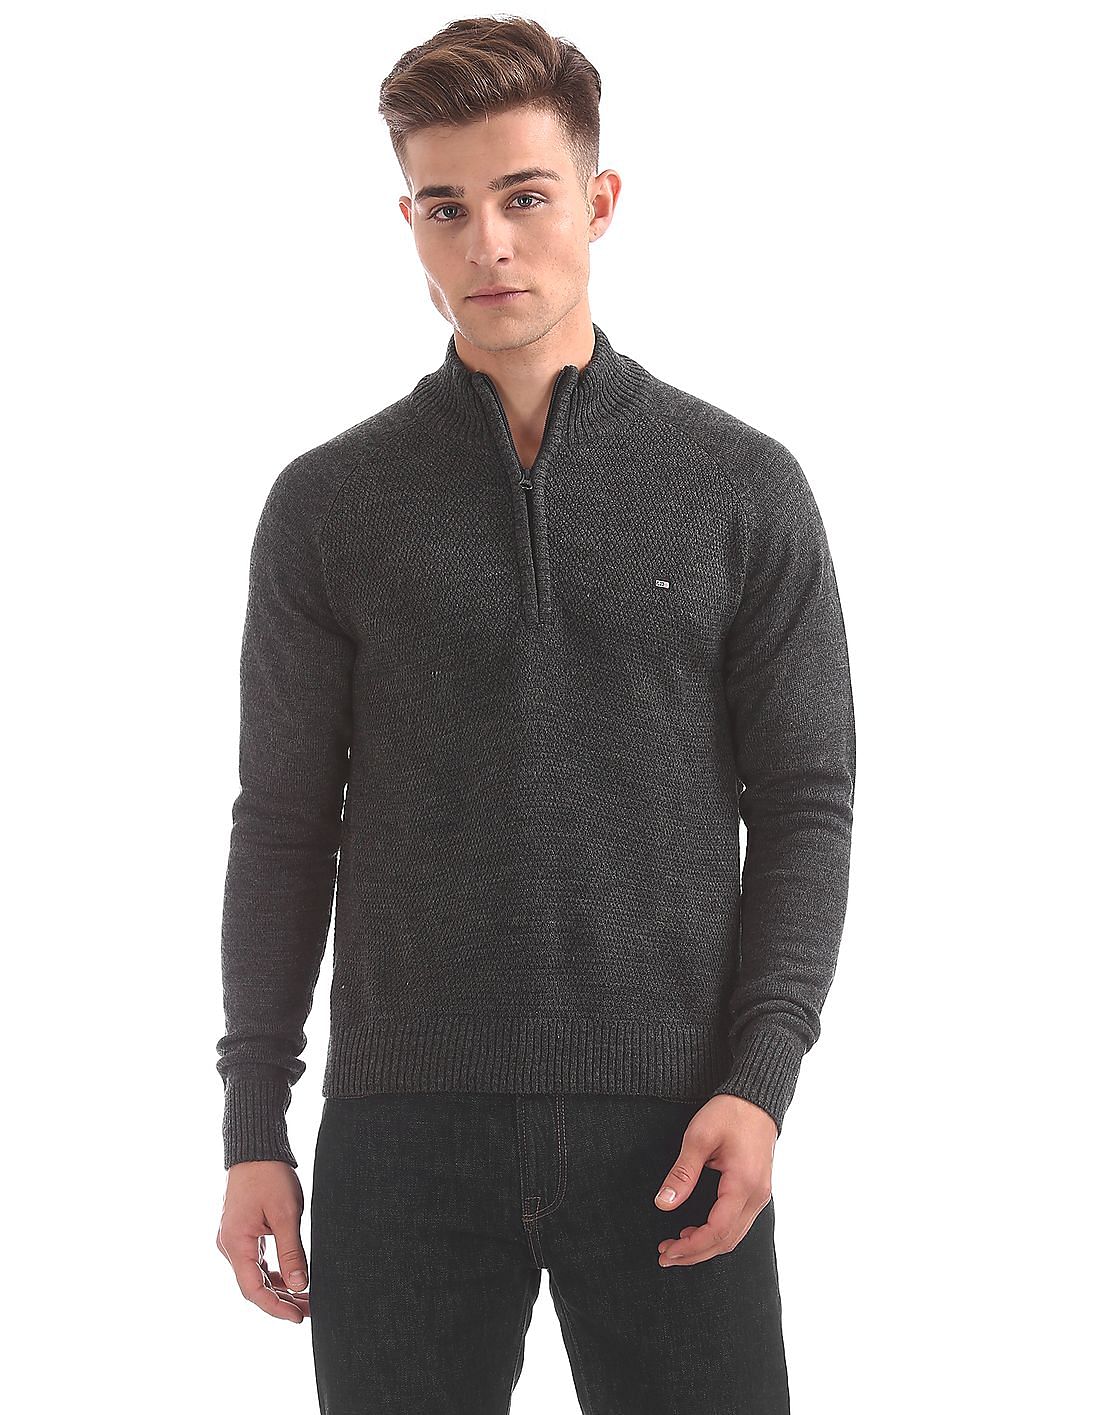 Buy Arrow Sports High Neck Patterned Knit Sweater - NNNOW.com